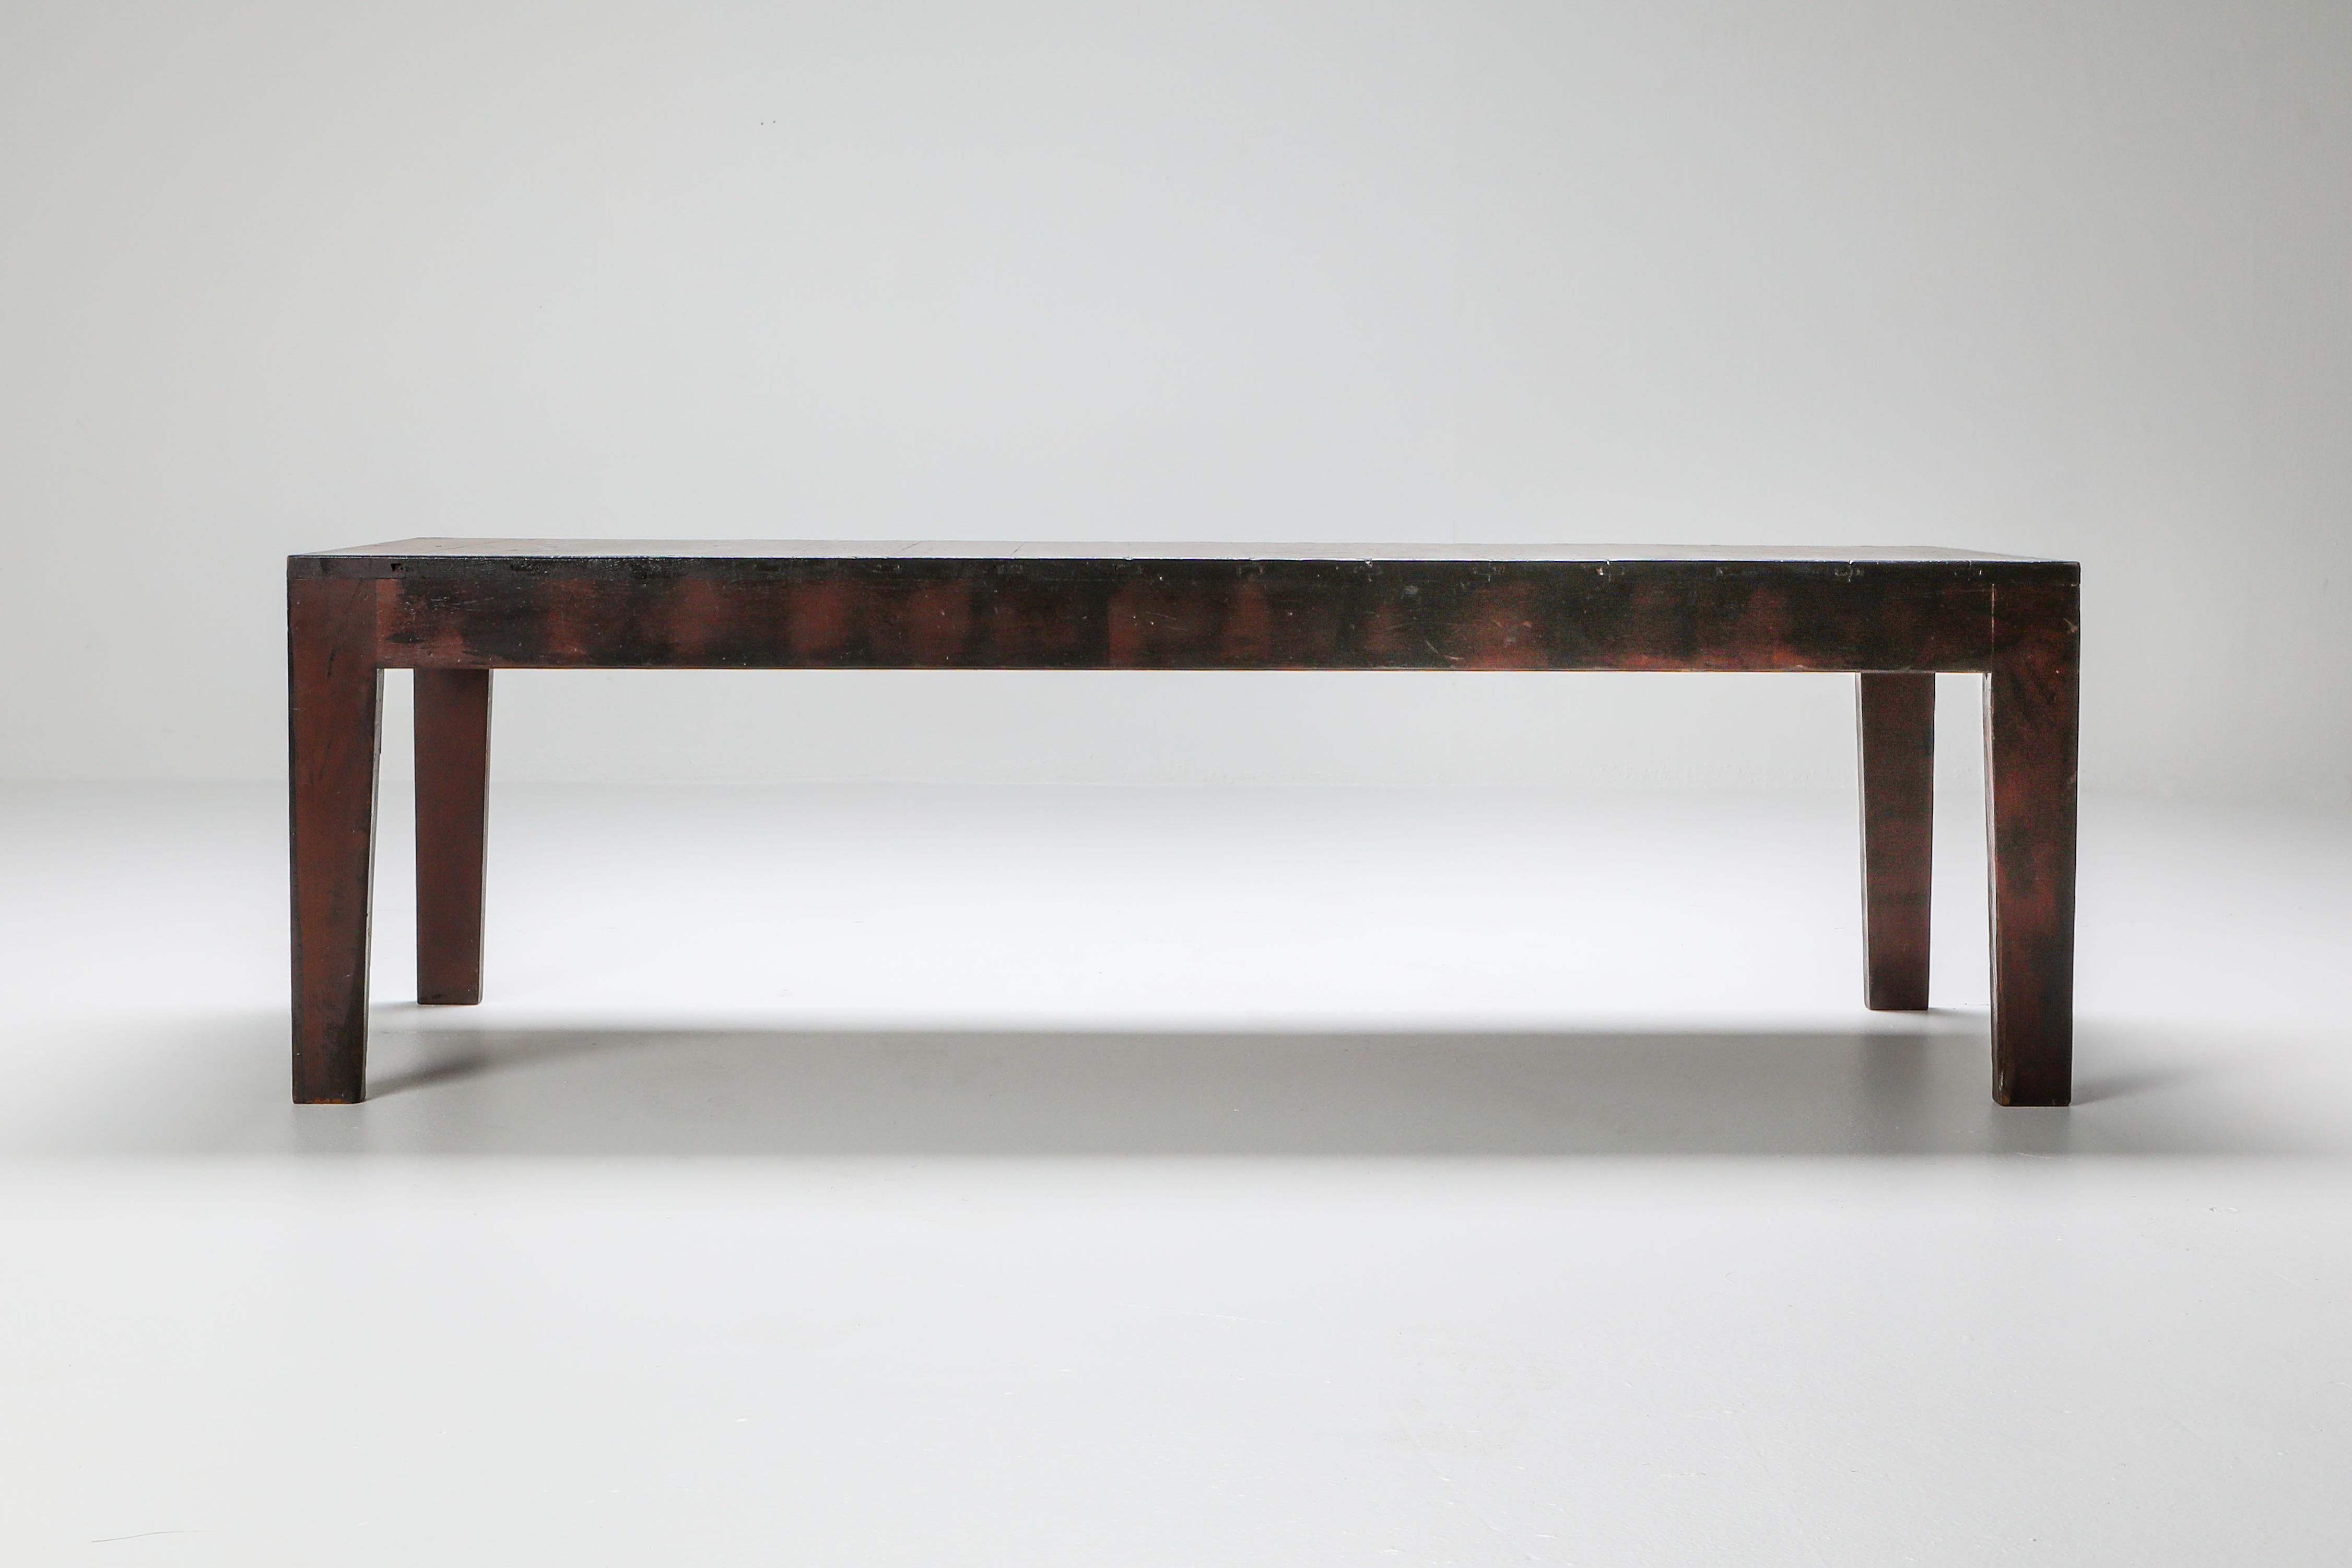 Dom Hans van der Laan coffee table, The Netherlands, 1960s

Executed by Jan de Jong 
 During the reconstruction period after WWII the Dutch architect Jan de Jong and Dom Hans van der Laan collaborated on several architectural projects including